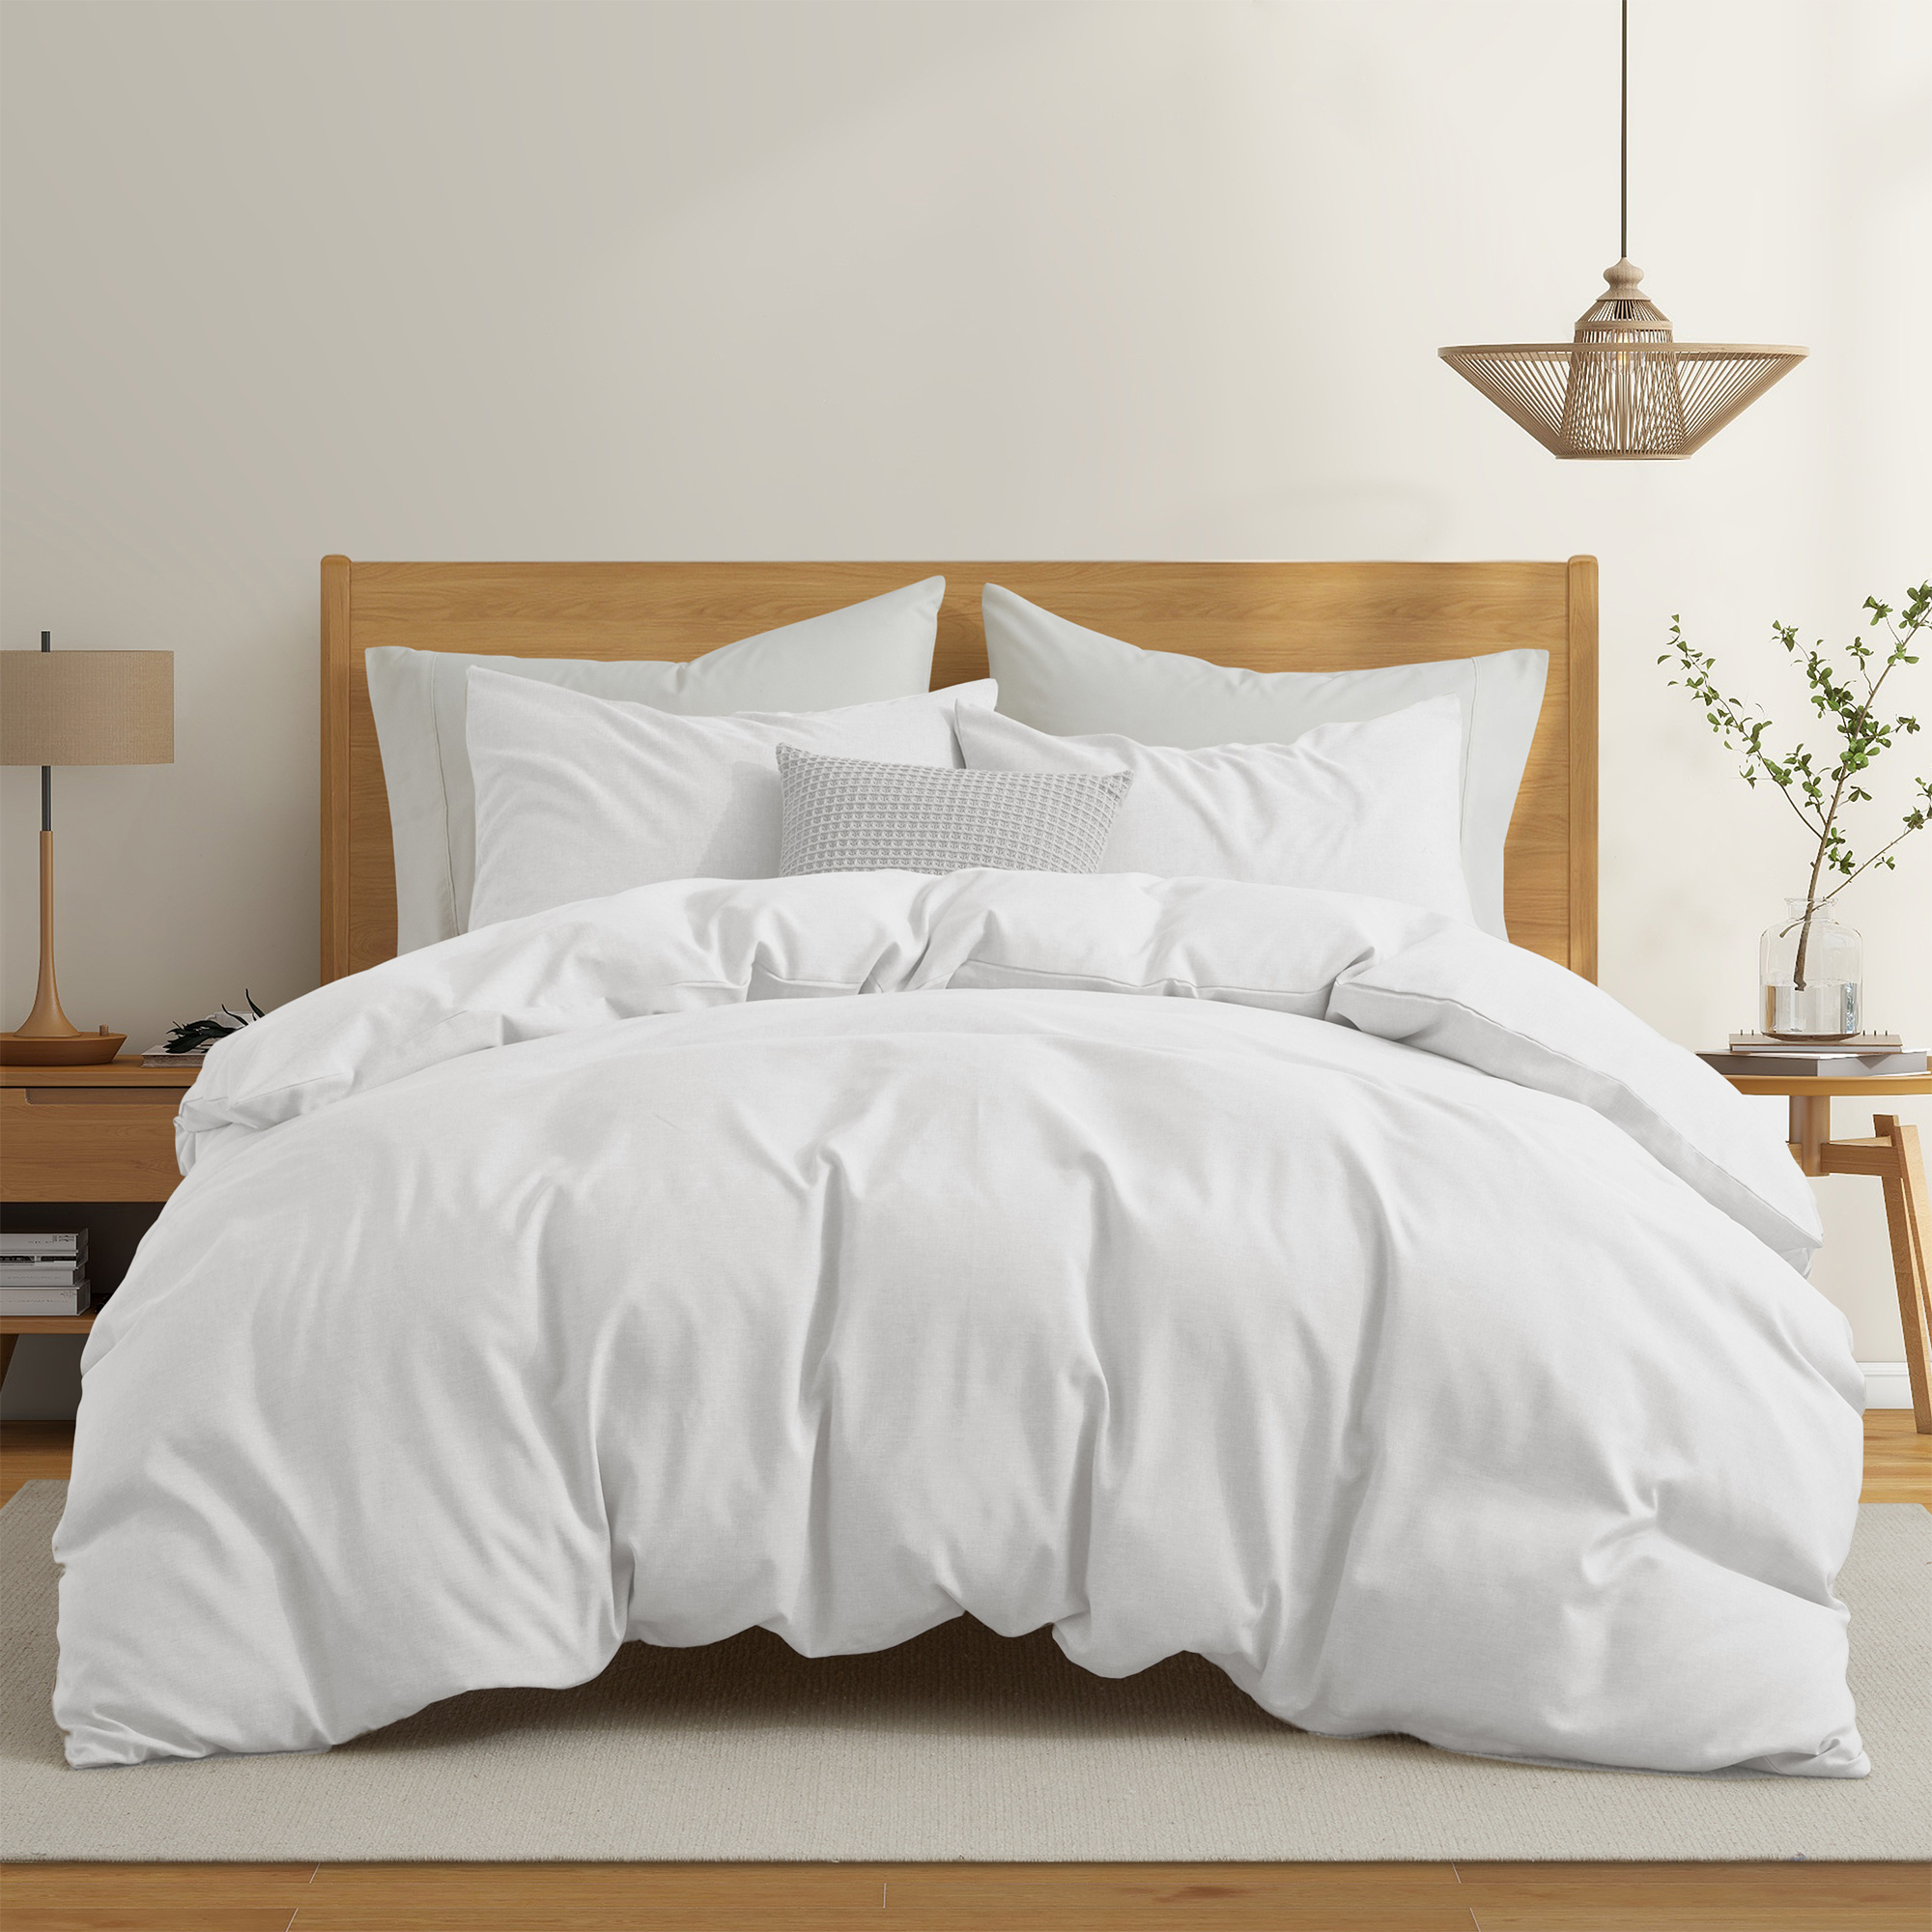 Solid Faux Linen Duvet Cover Set With Shams - Luxurious Comfort - White, King-90x106